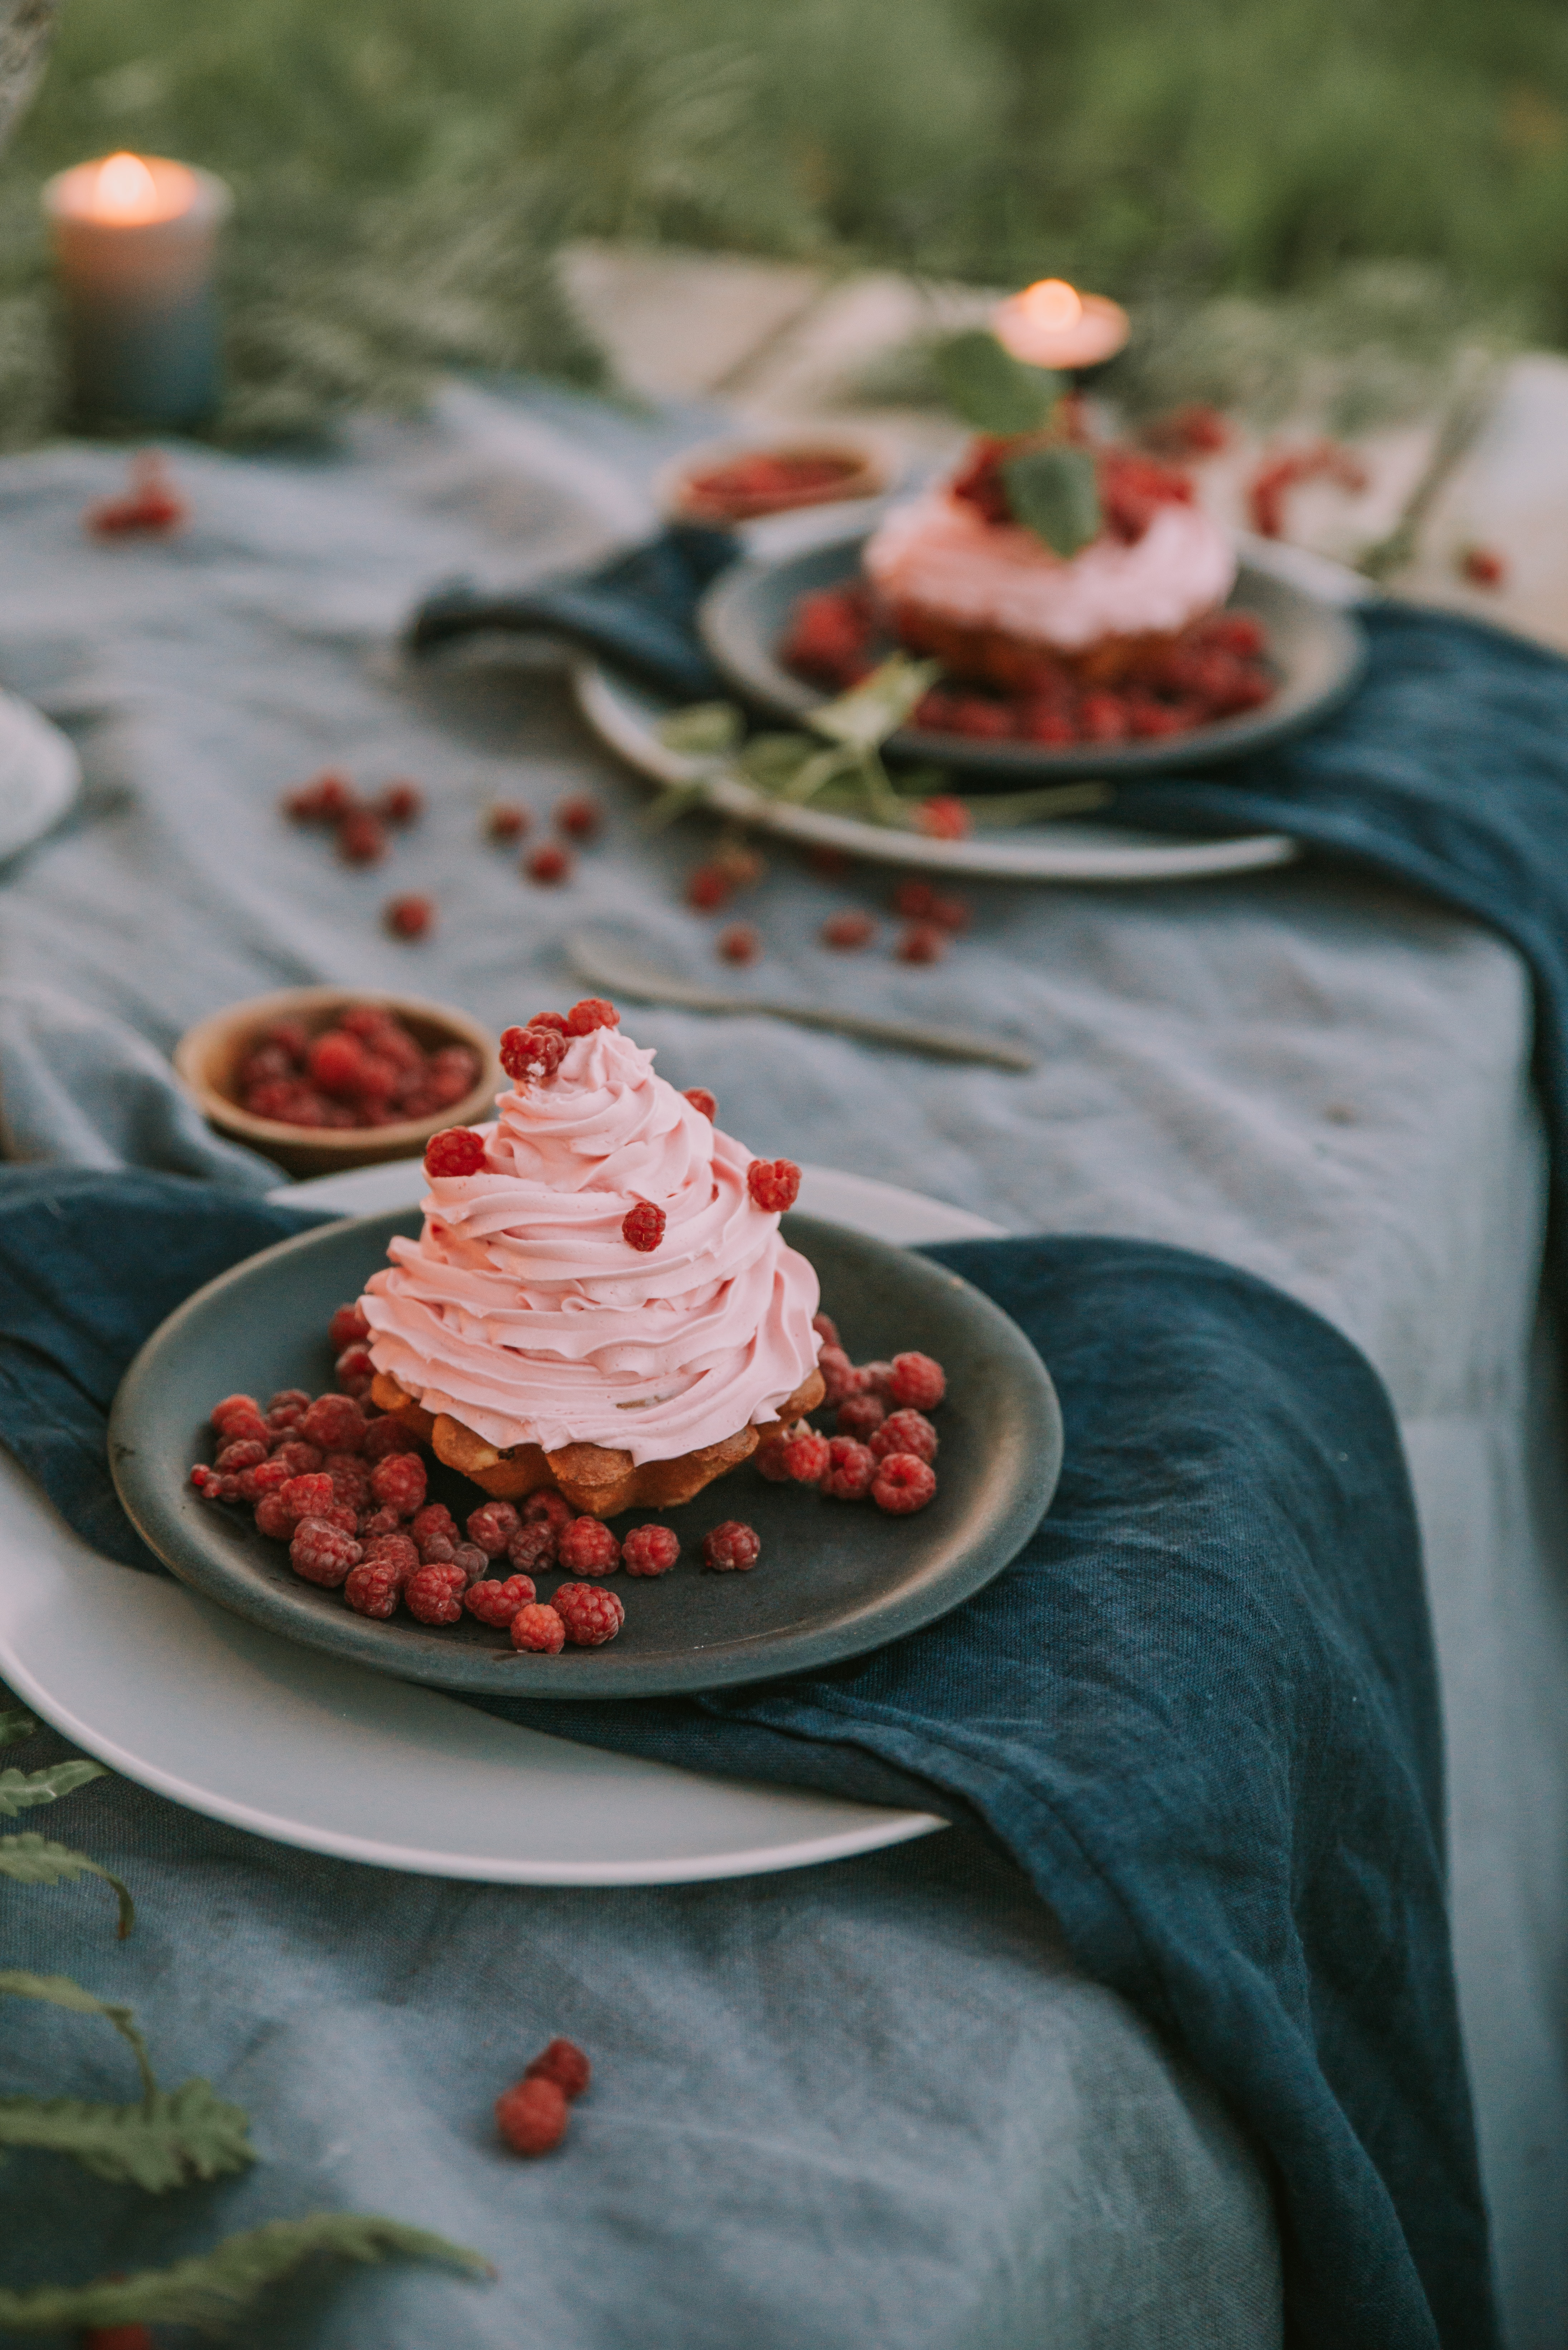 122483 Screensavers and Wallpapers Cream for phone. Download cake, food, raspberry, desert, berries, cream pictures for free